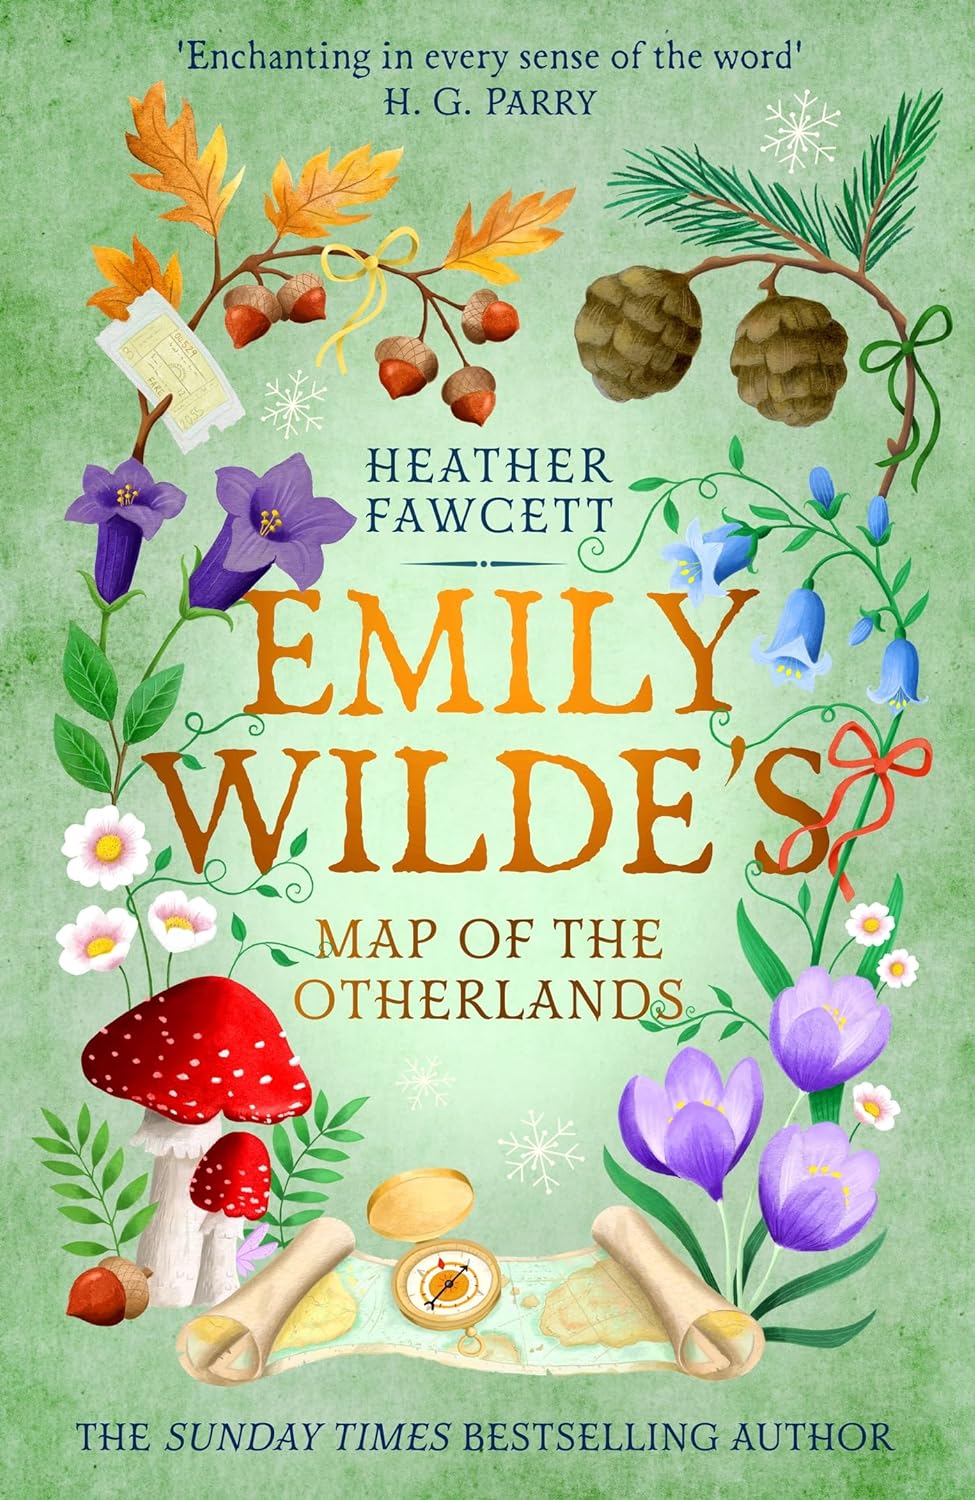 emilys wilde's maps of the otherlands